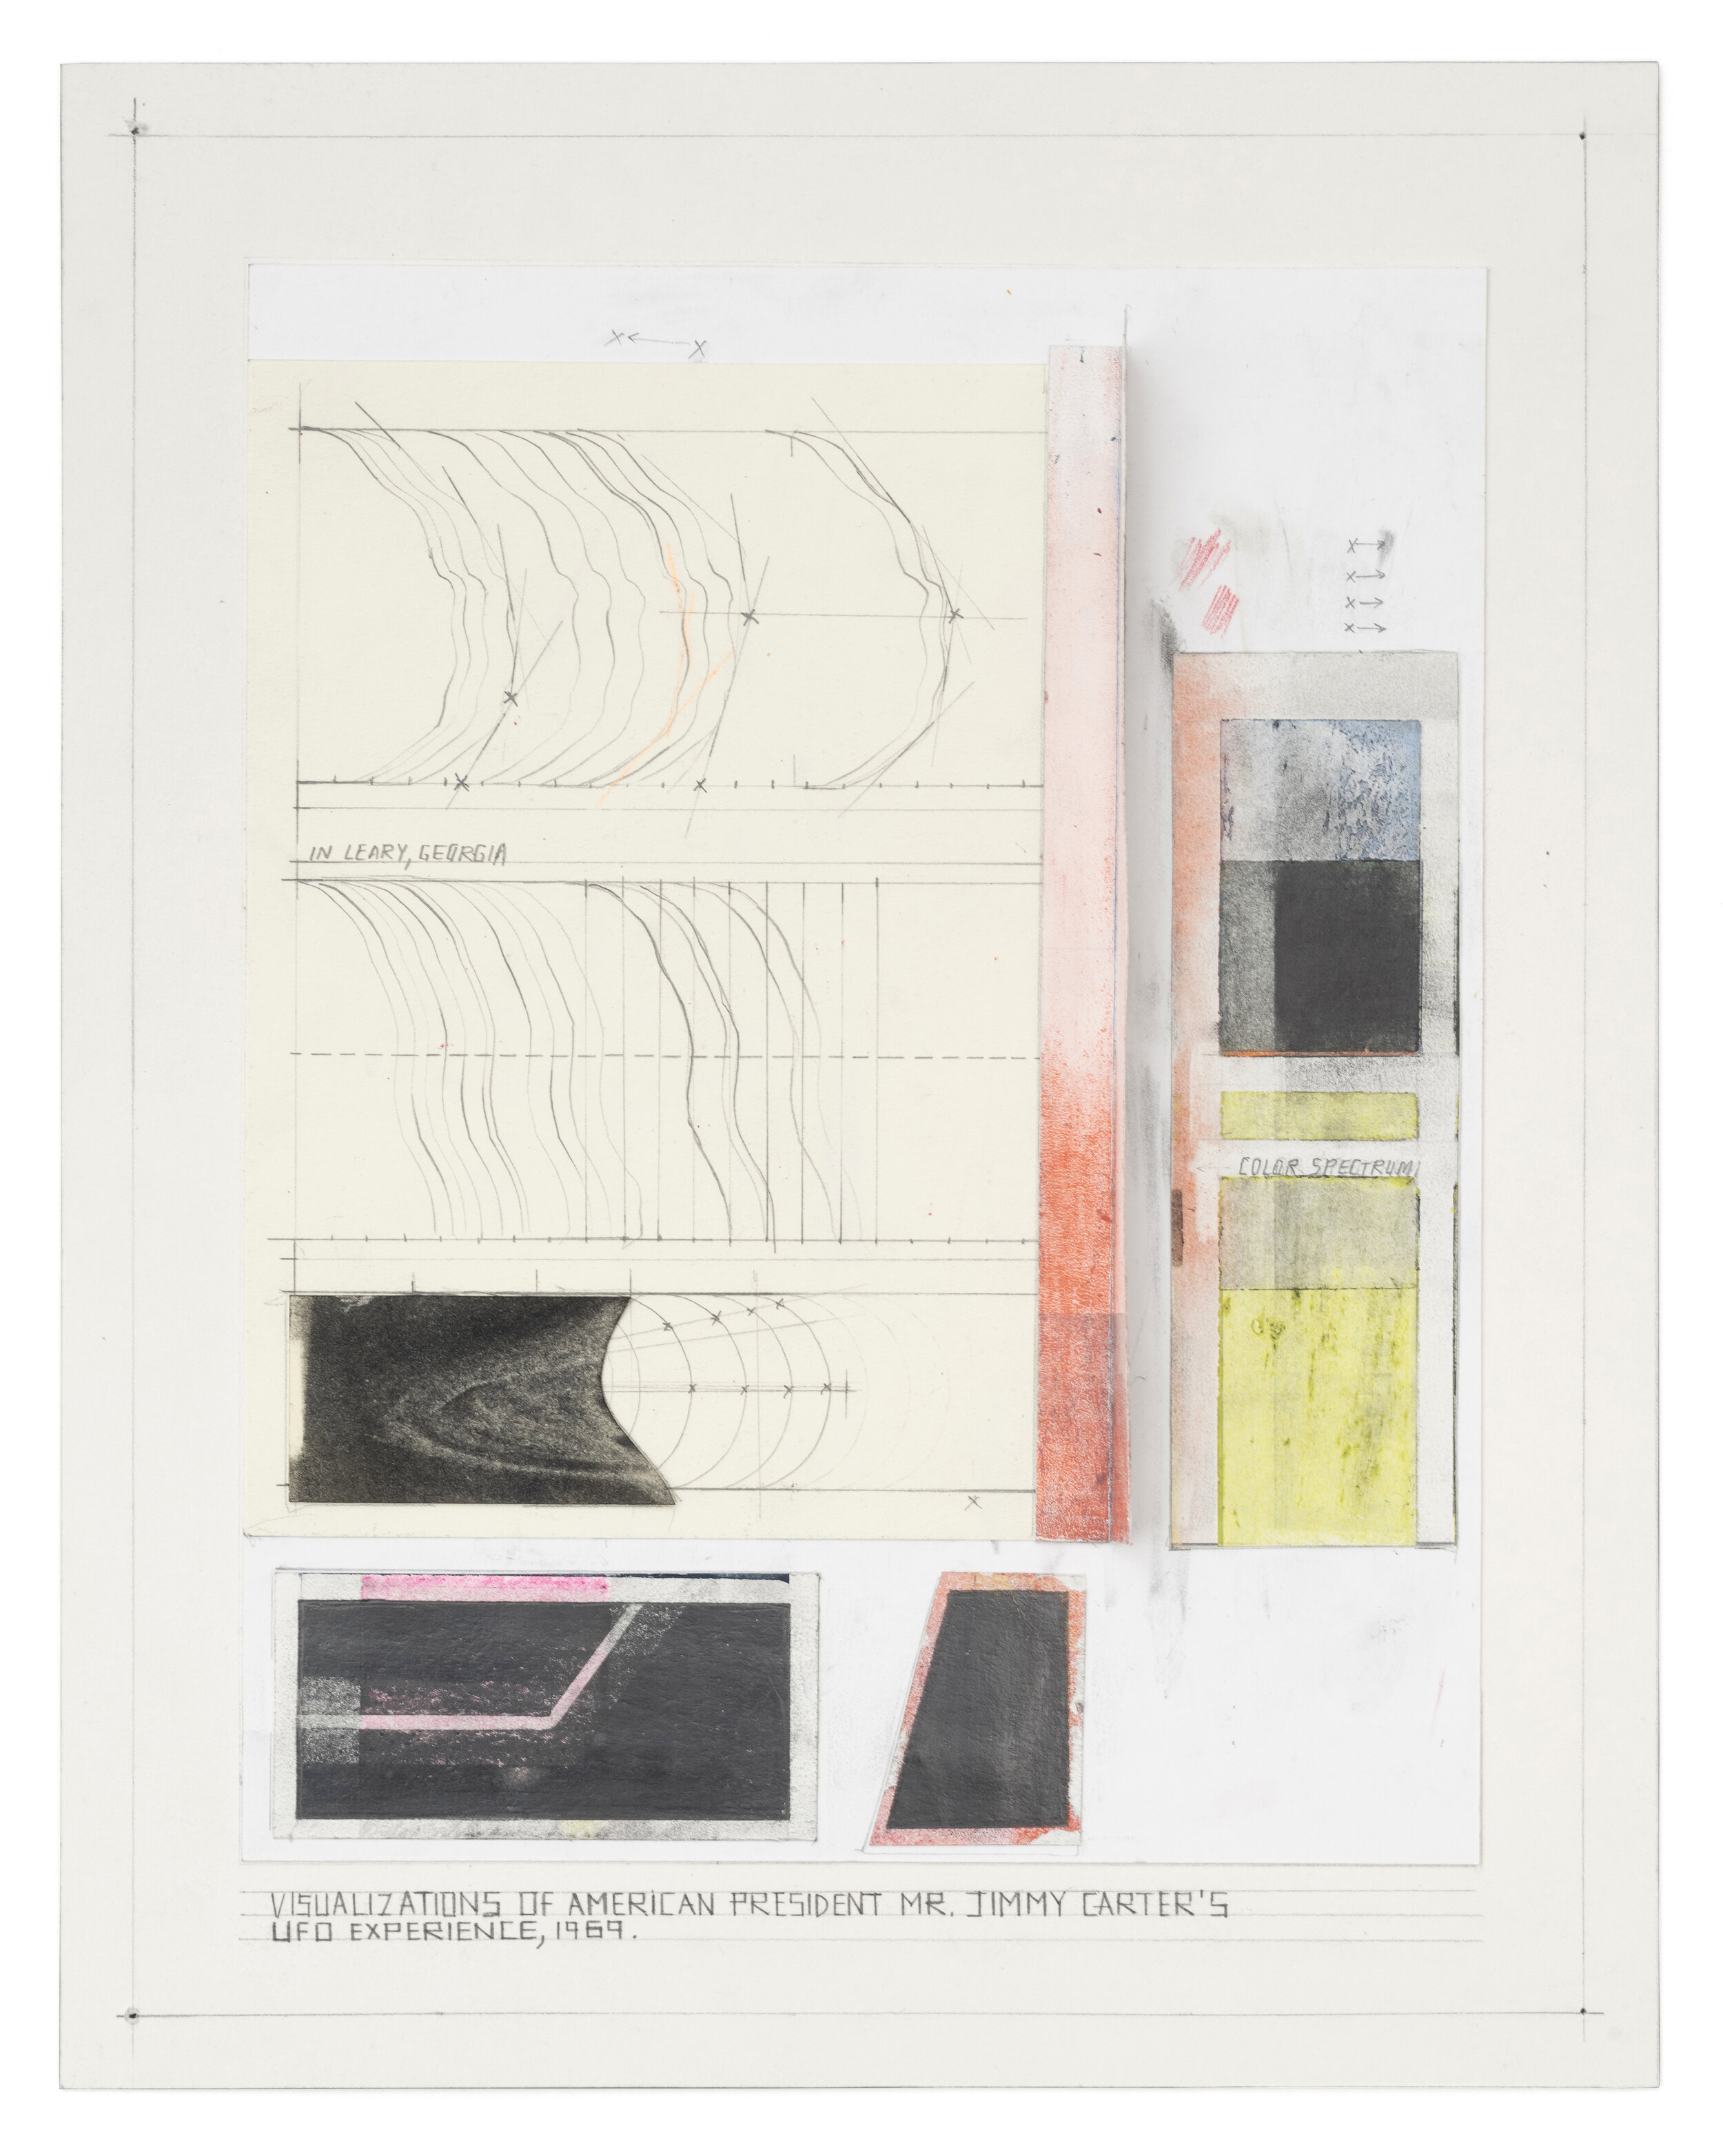 DEB_SOKOLOW_2019_Visualizations_of_Jimmy_Carters_UFO_mixed_media_on_paper_14high_x_11wide_x_half-inch_deep_inches.jpg